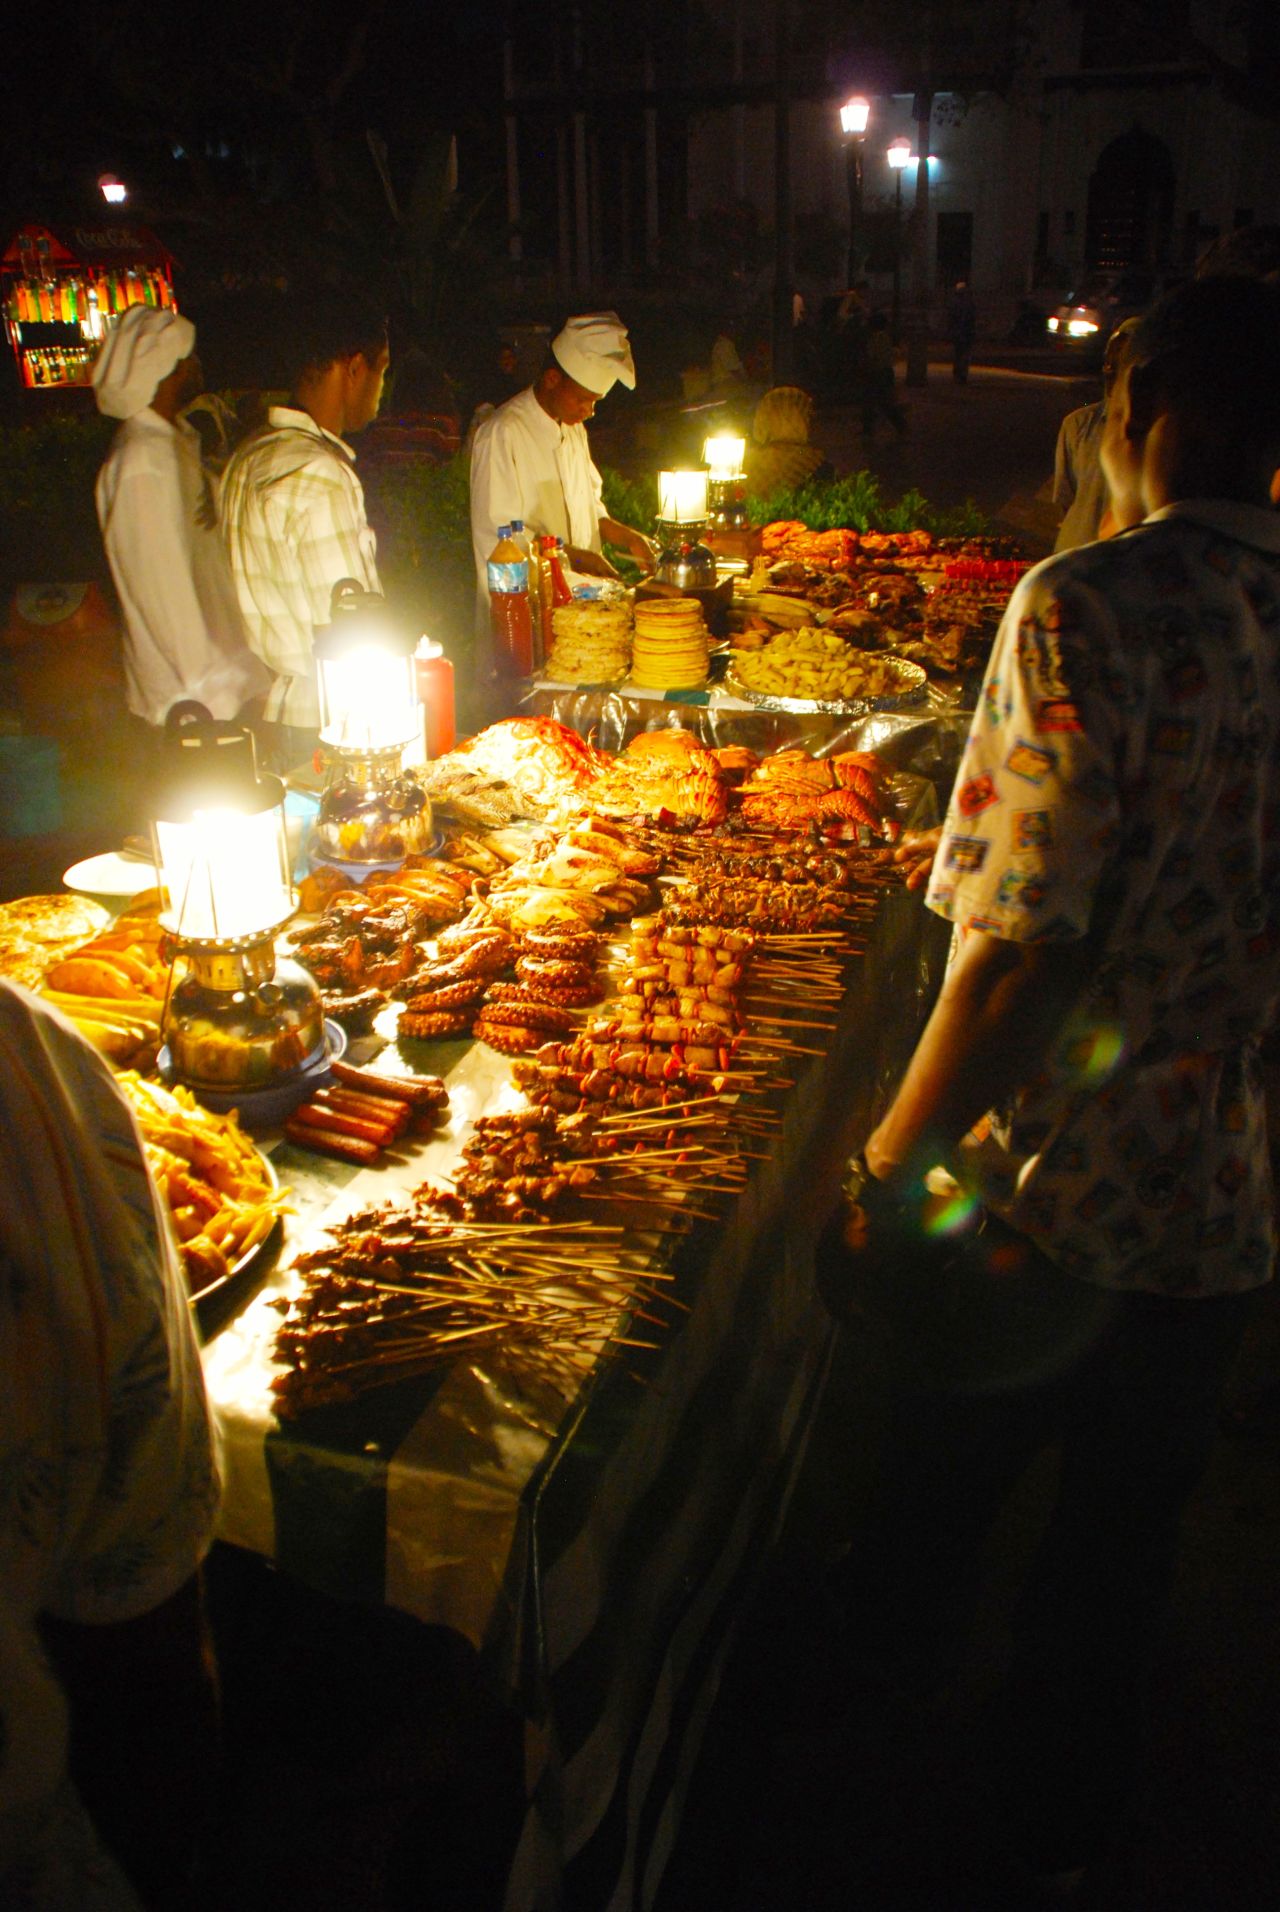 People wander the food stalls at Forodhani Gardens for snacks including Zanzibar pizza, sugarcane drink and fresh seafood. 